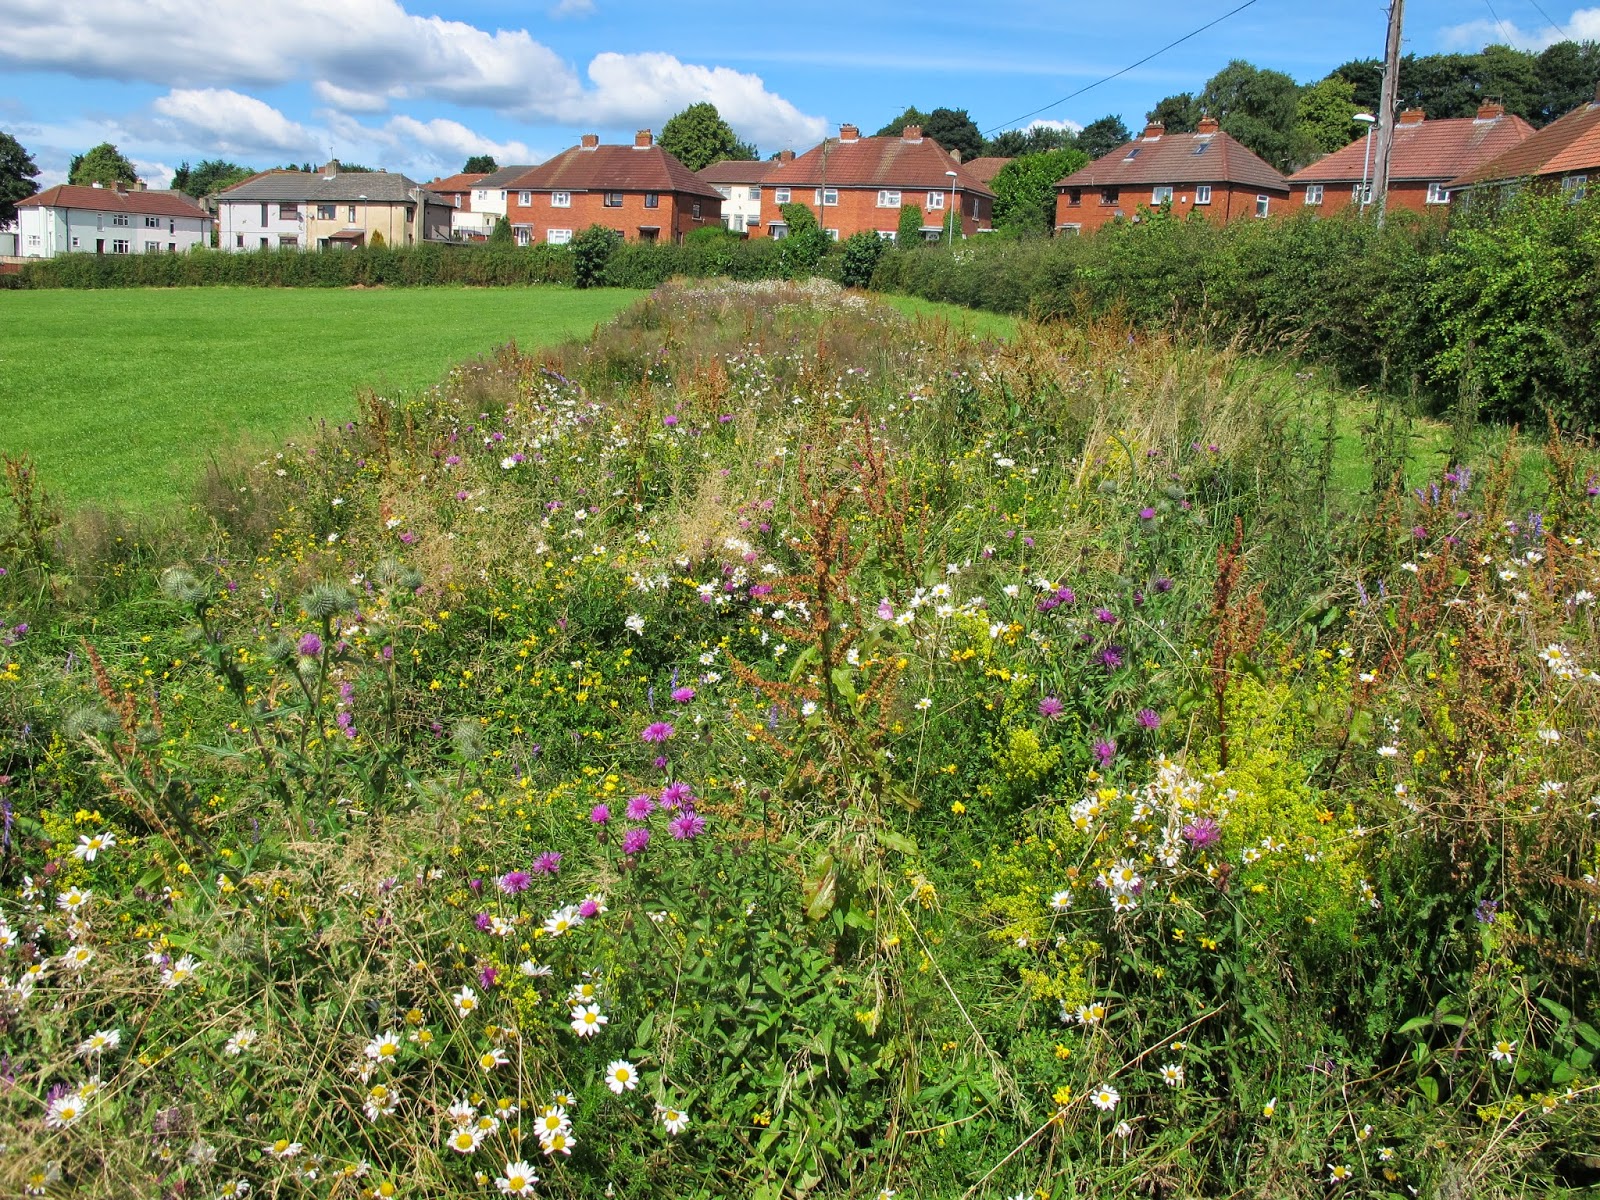 An example of an urban pollinator project in Leeds, West Yorkshire